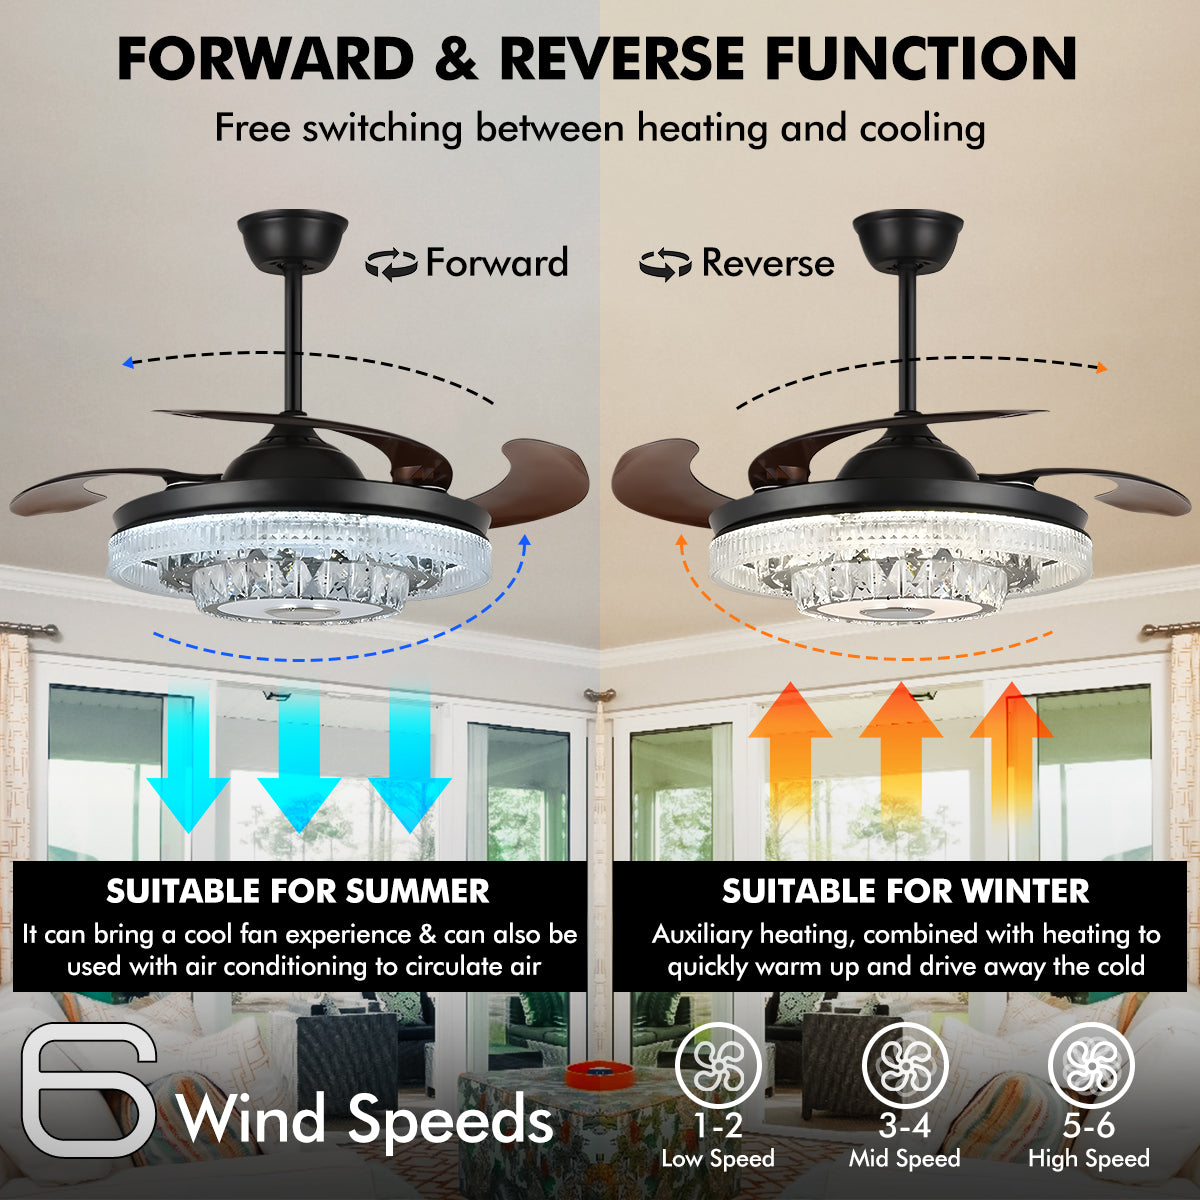 42" Modern Variable Frequency Crystal Ceiling Fan with Light